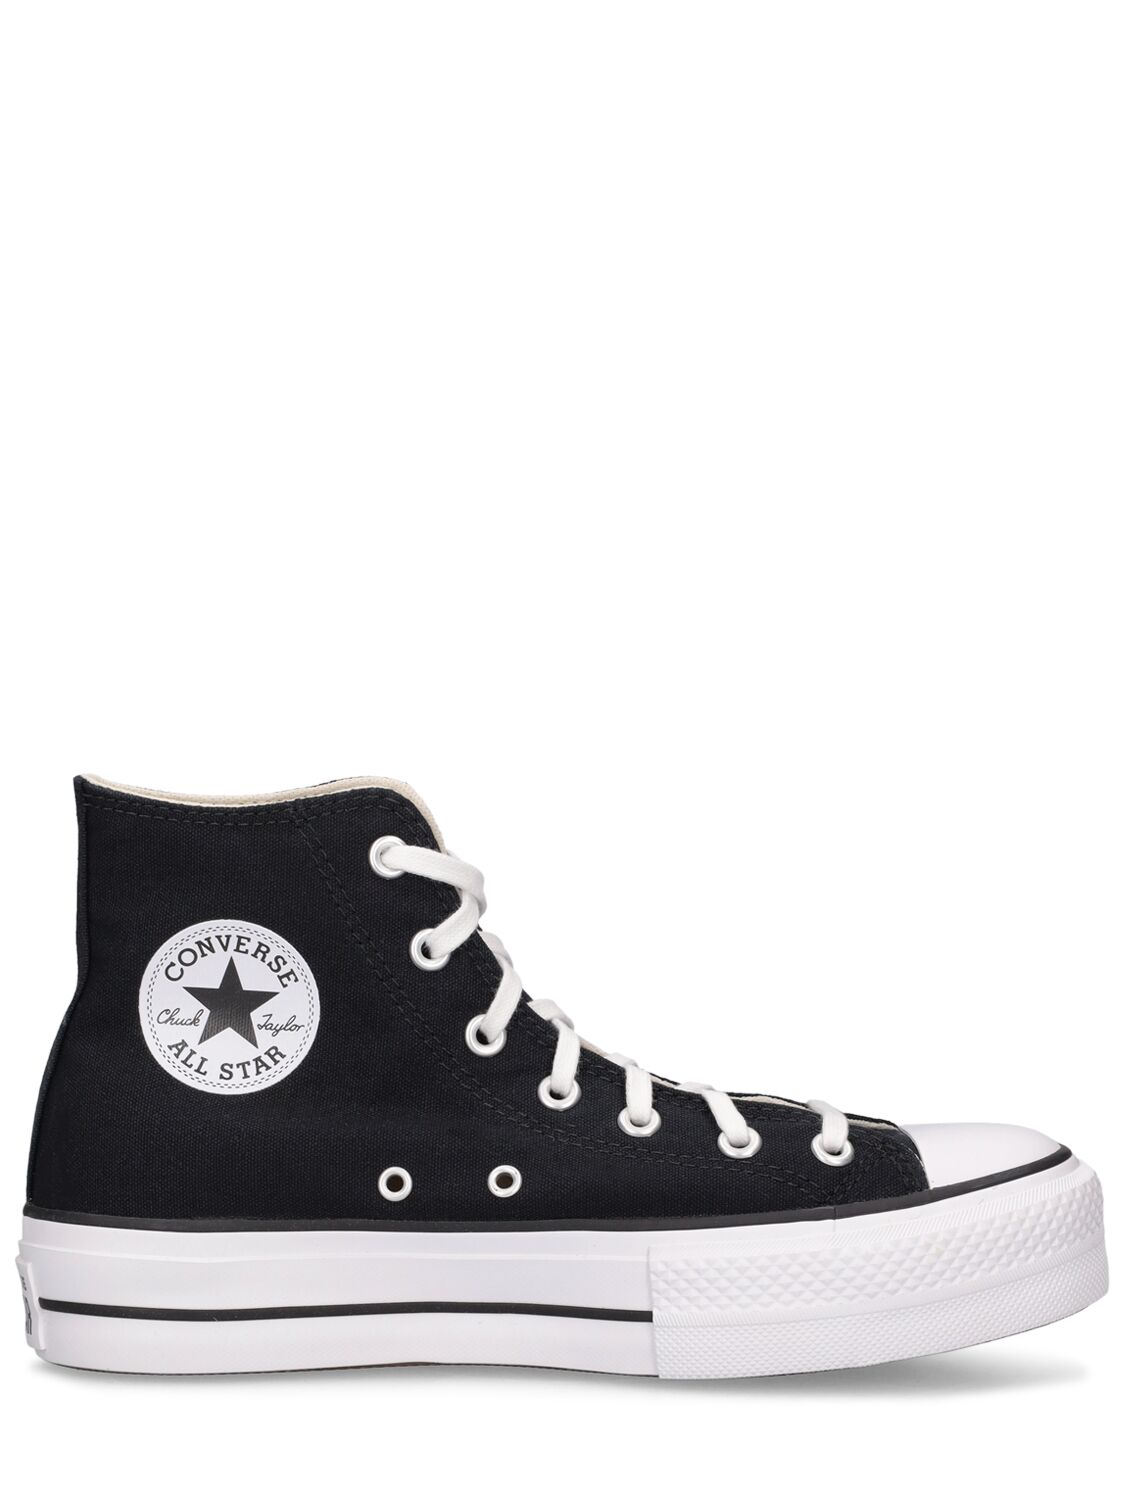 Image of Chuck Taylor All Star Platform Sneakers